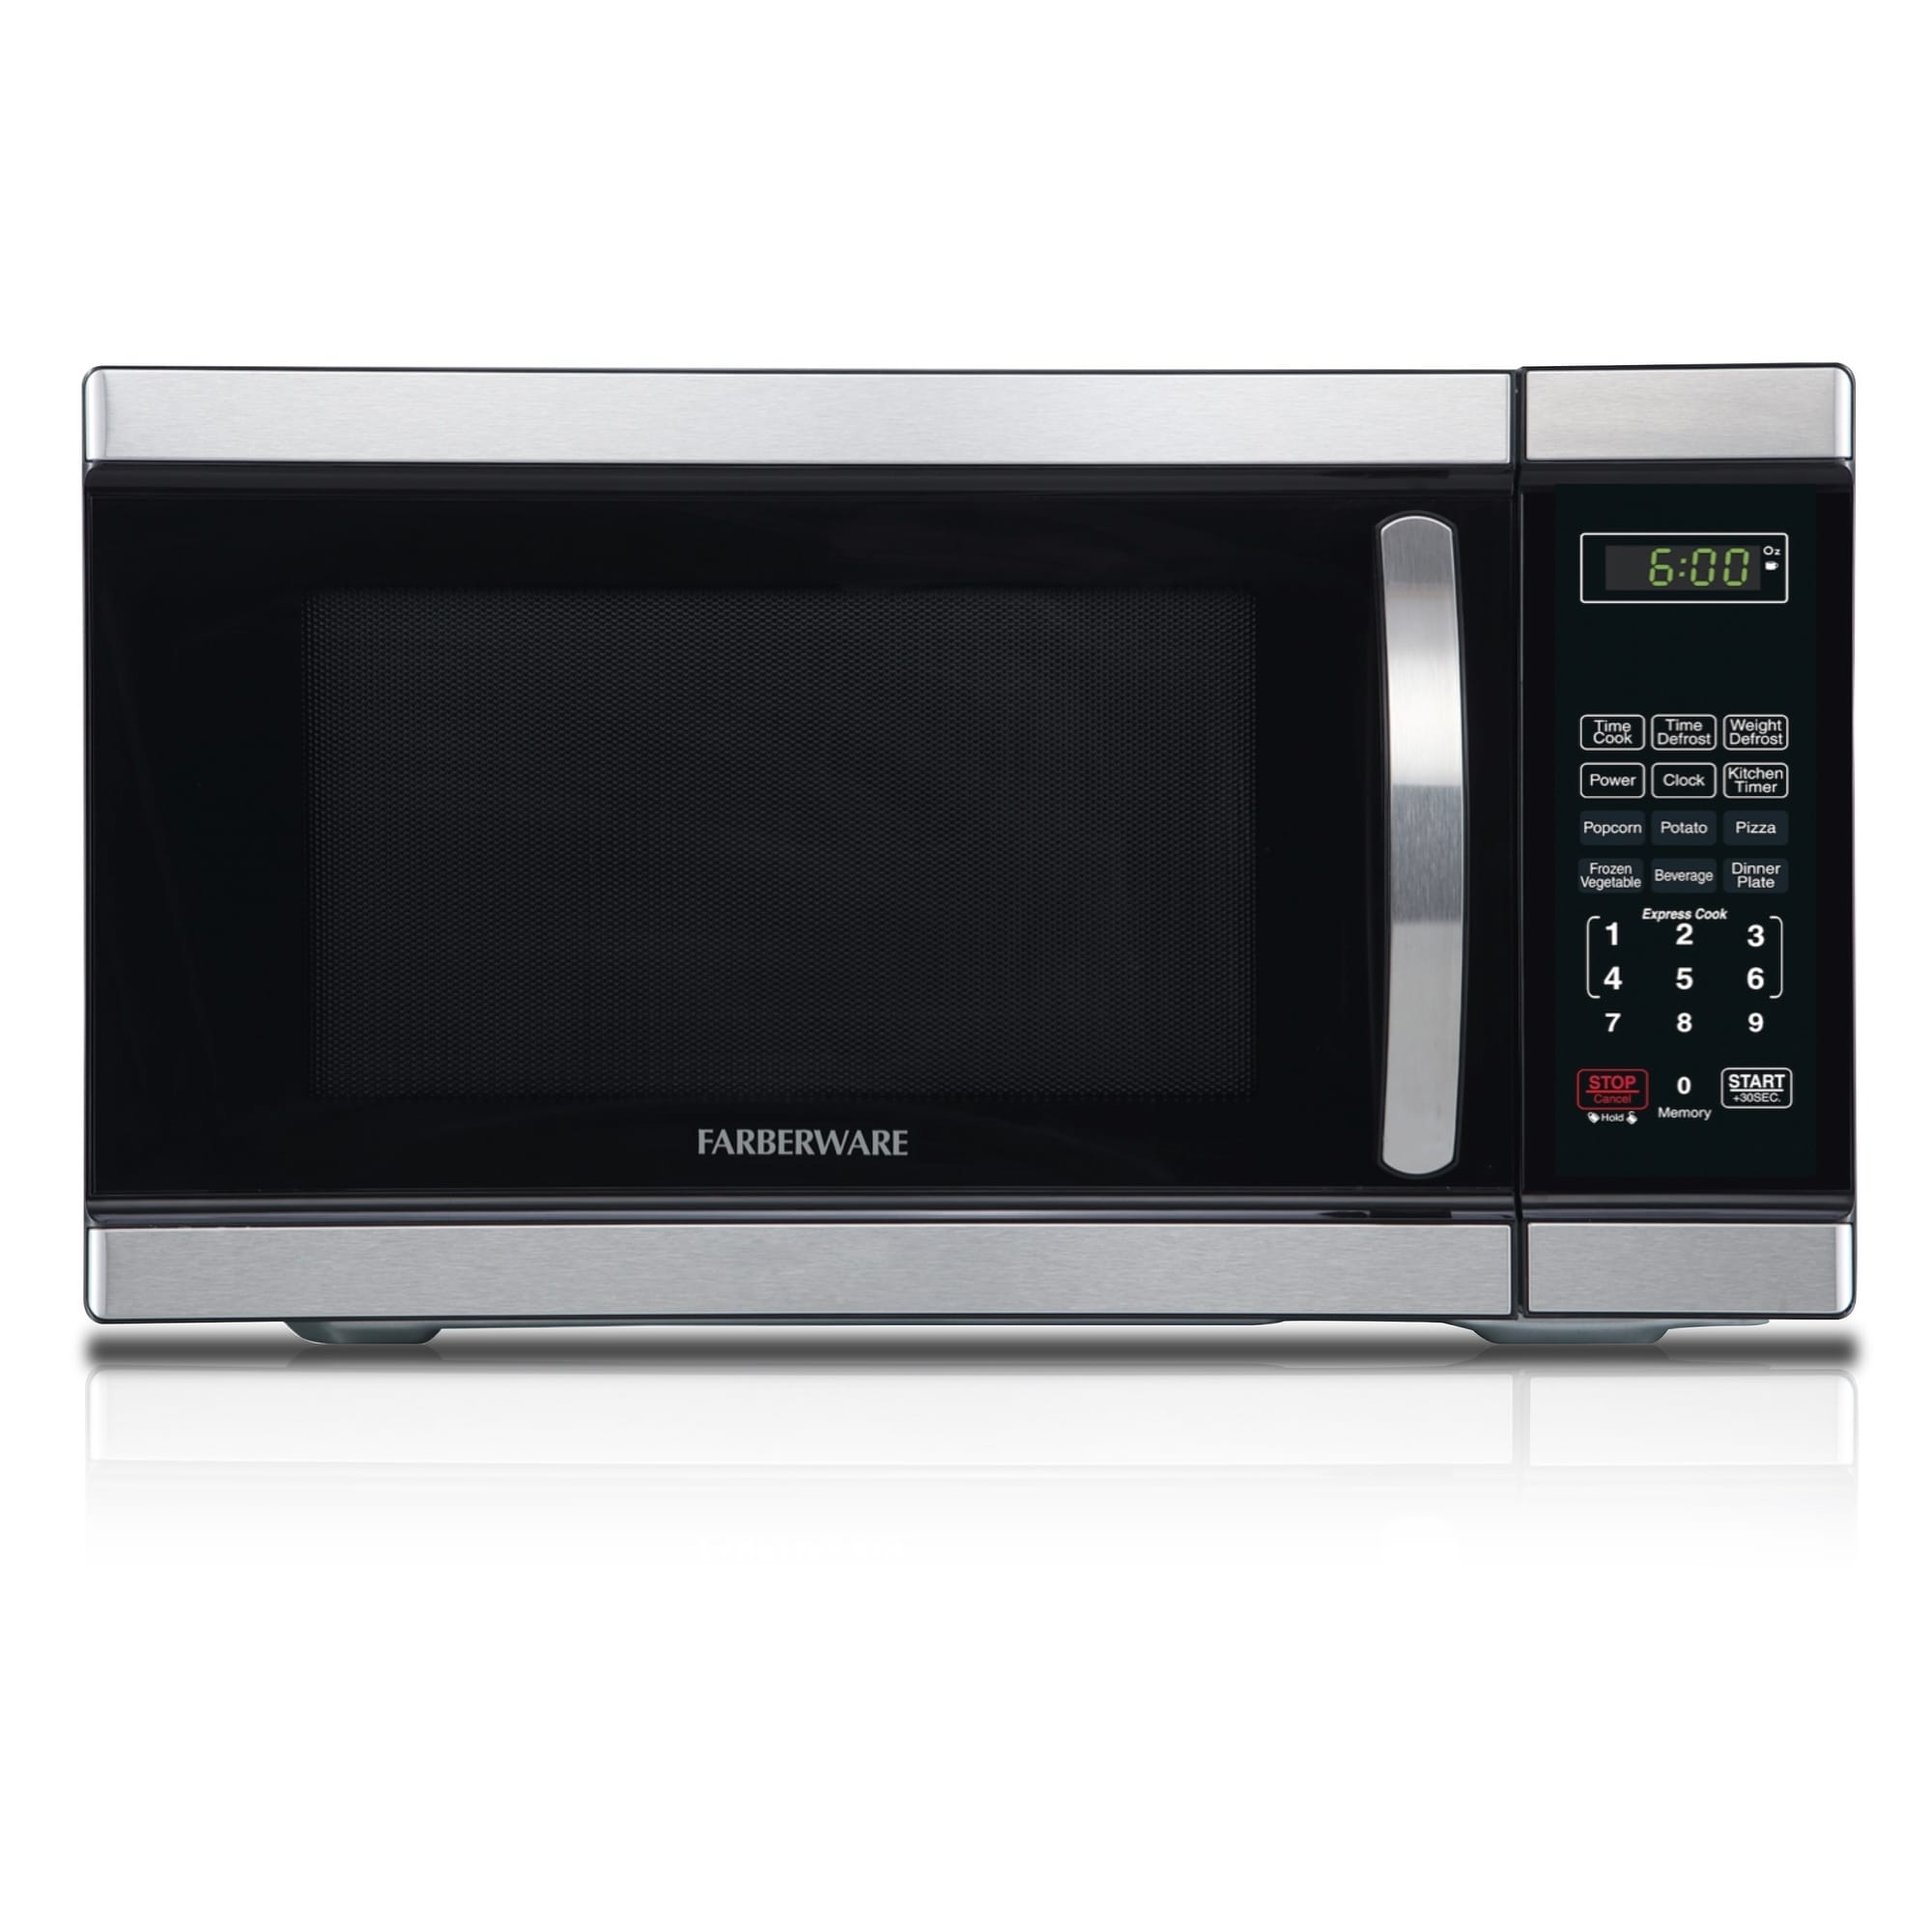 https://ak1.ostkcdn.com/images/products/29057685/Farberware-Professional-FMO11AHTBKL-1.1-Cu.-Ft.-1000-Watt-Microwave-Oven-Stainless-Steel-0c4eace1-35c3-41e7-8be7-8452c2cdade3.jpg